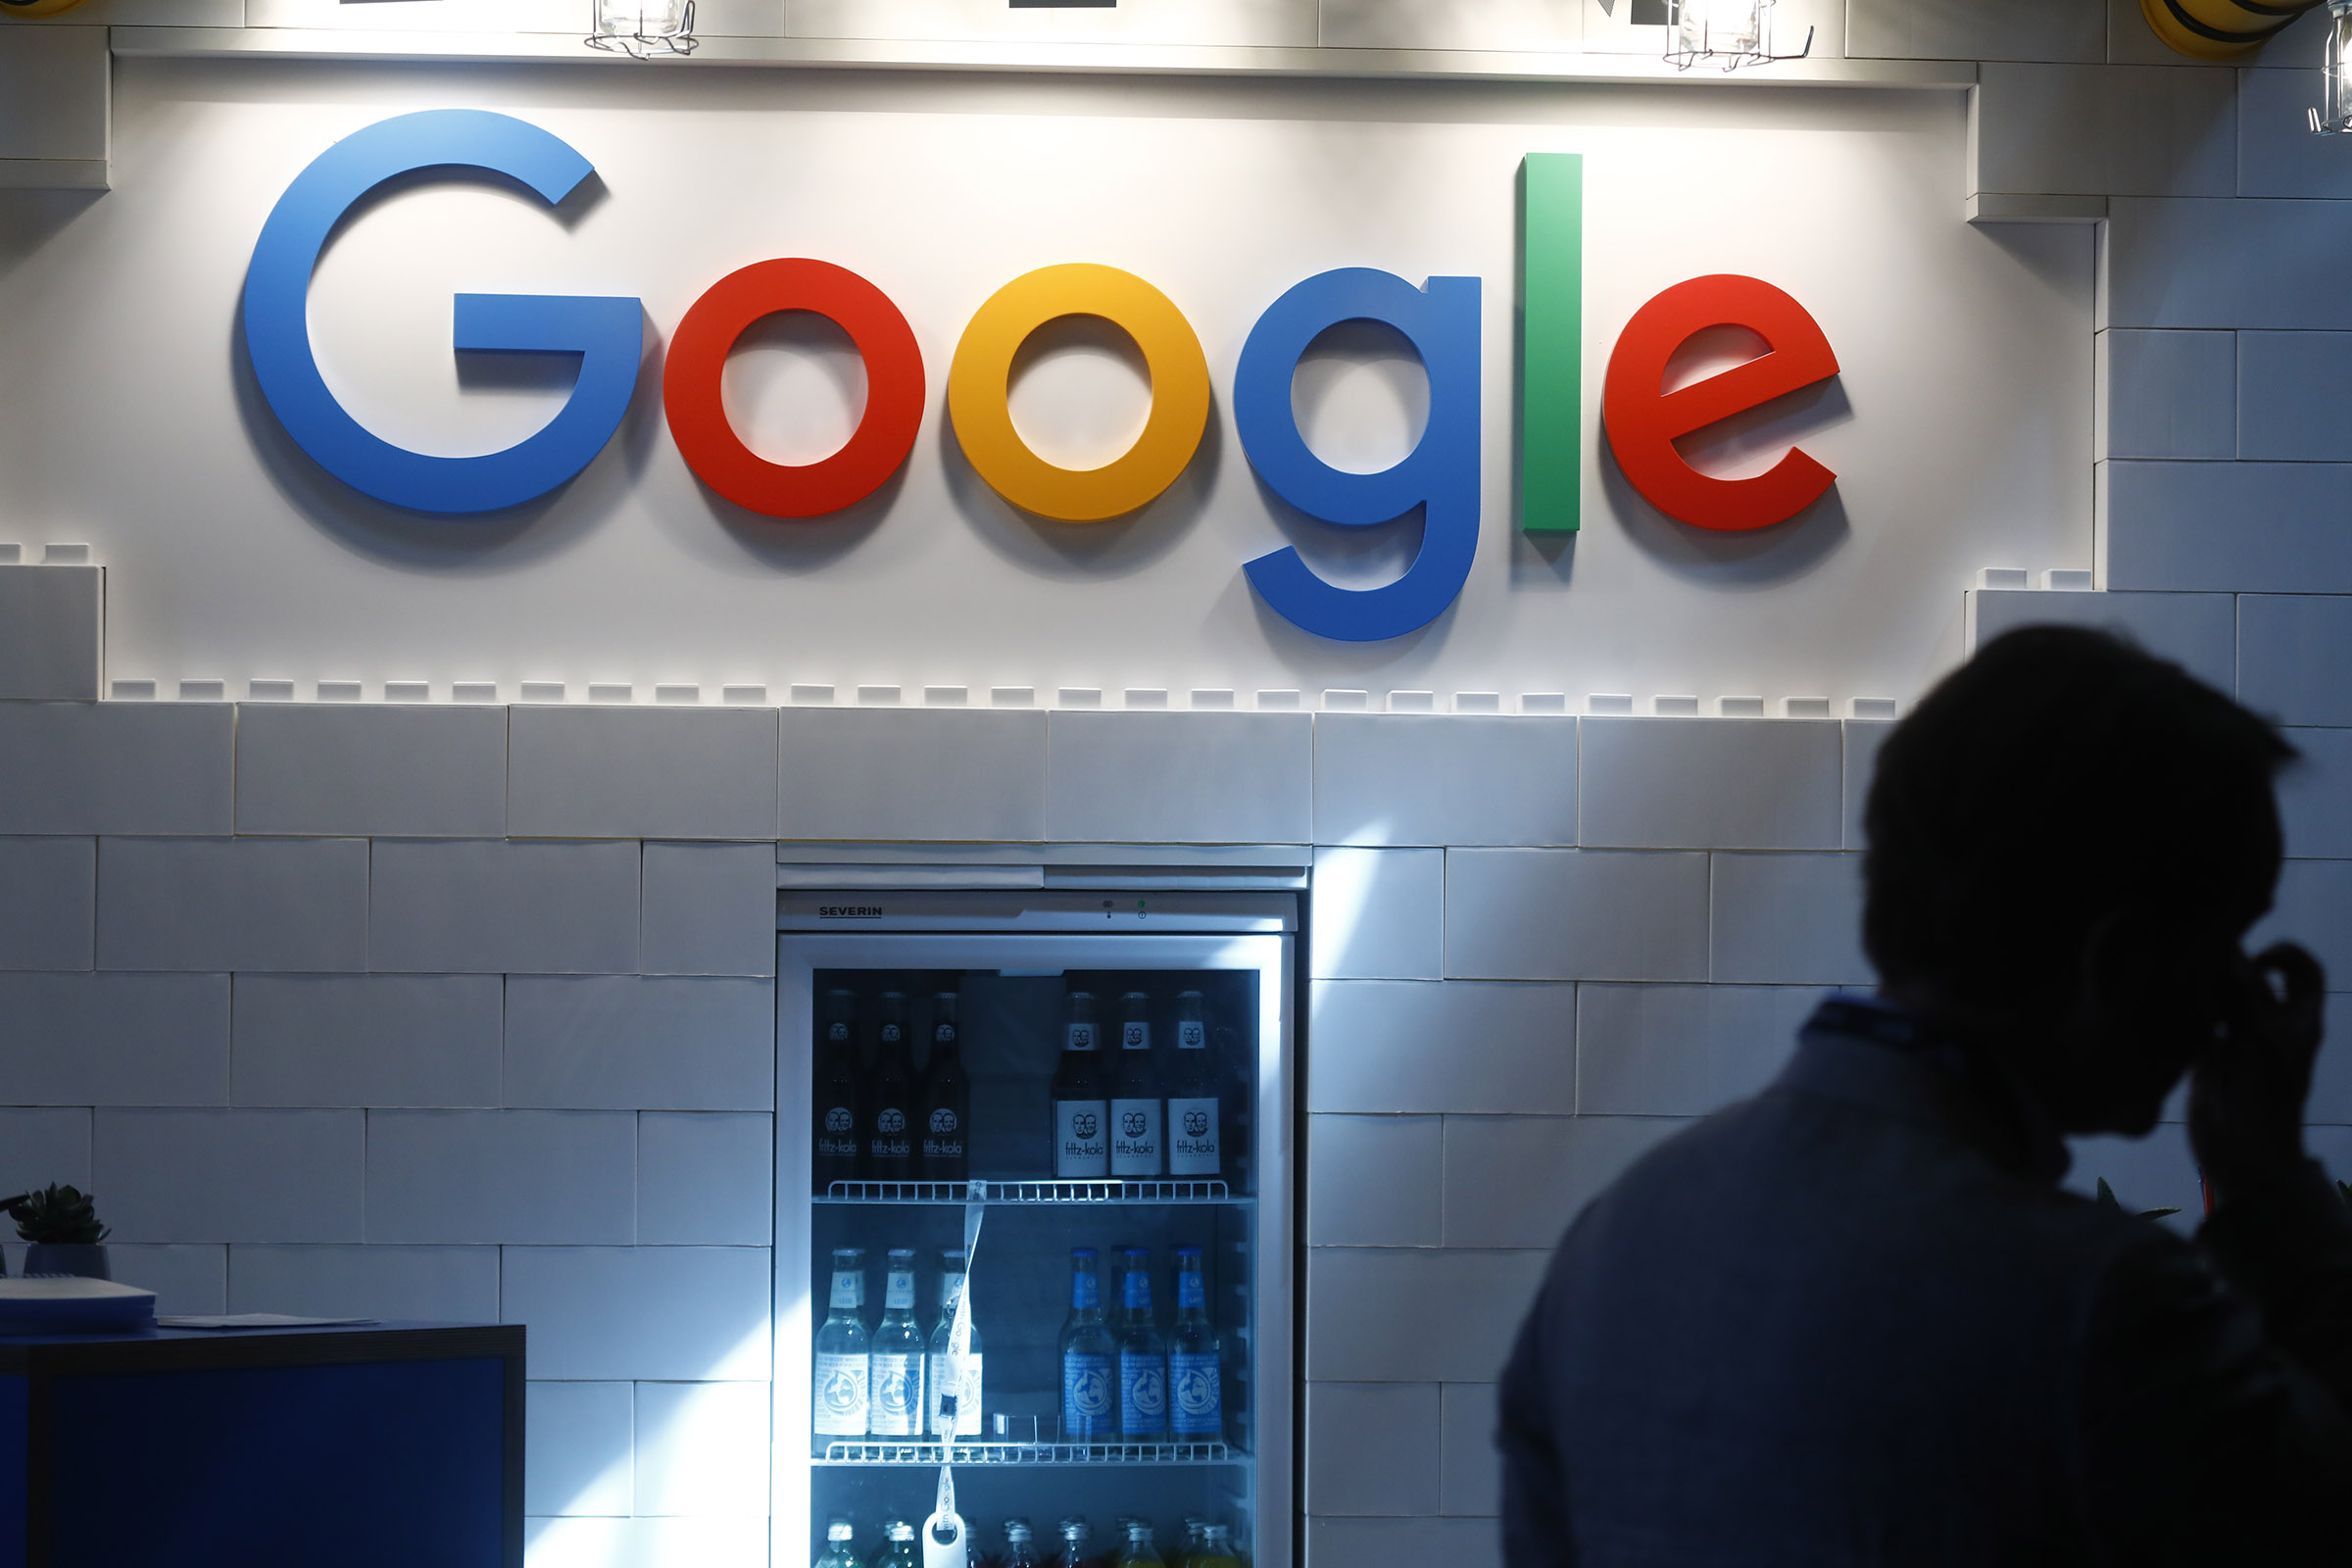 The Google logo stands on display at a conference in Berlin on June 6, 2018. (Michele Tantussi—Getty Images)